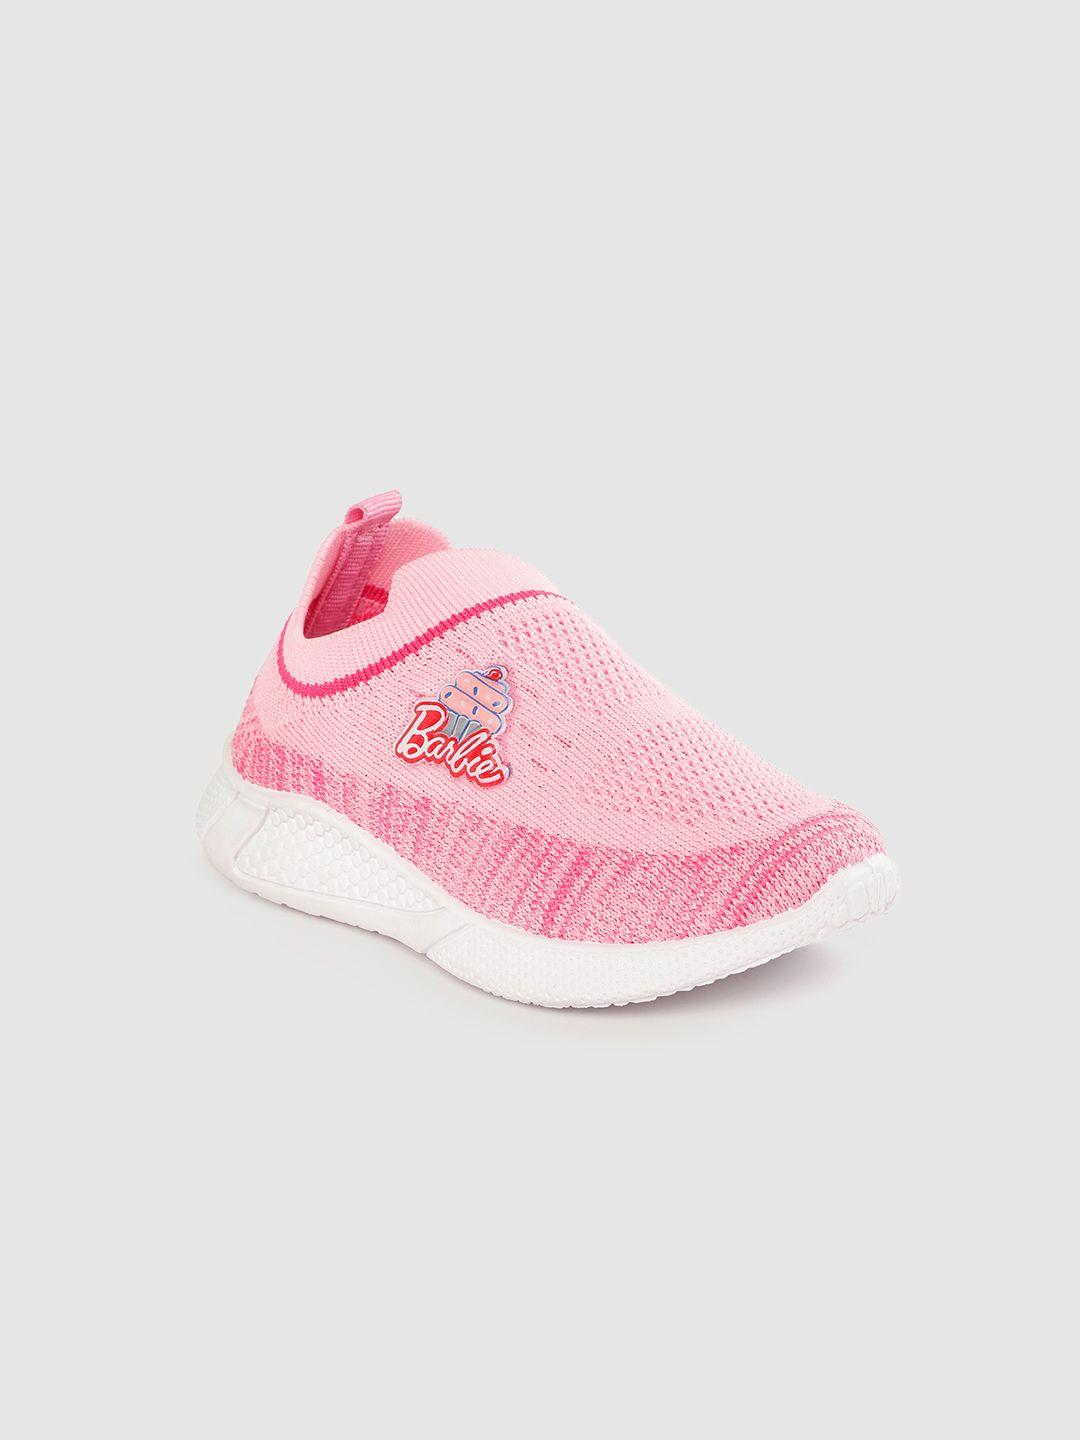 toothless boys pink solid barbie woven design slip-on sneakers